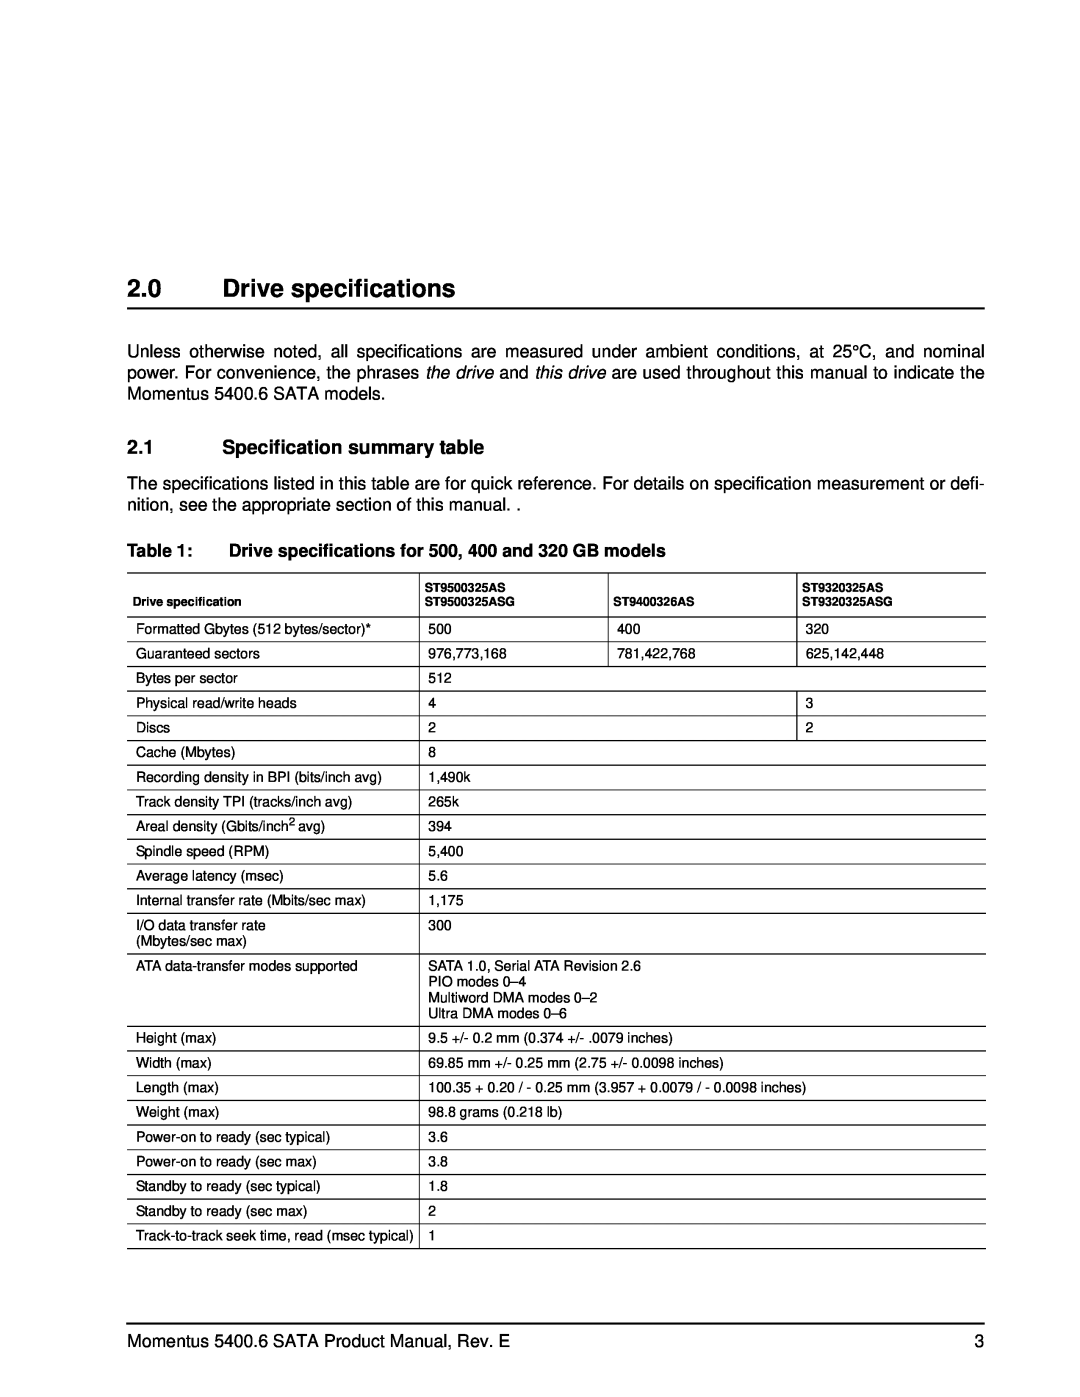 Seagate ST9160301AS, ST980313ASG manual Specification summary table, Drive specifications for 500, 400 and 320 GB models 